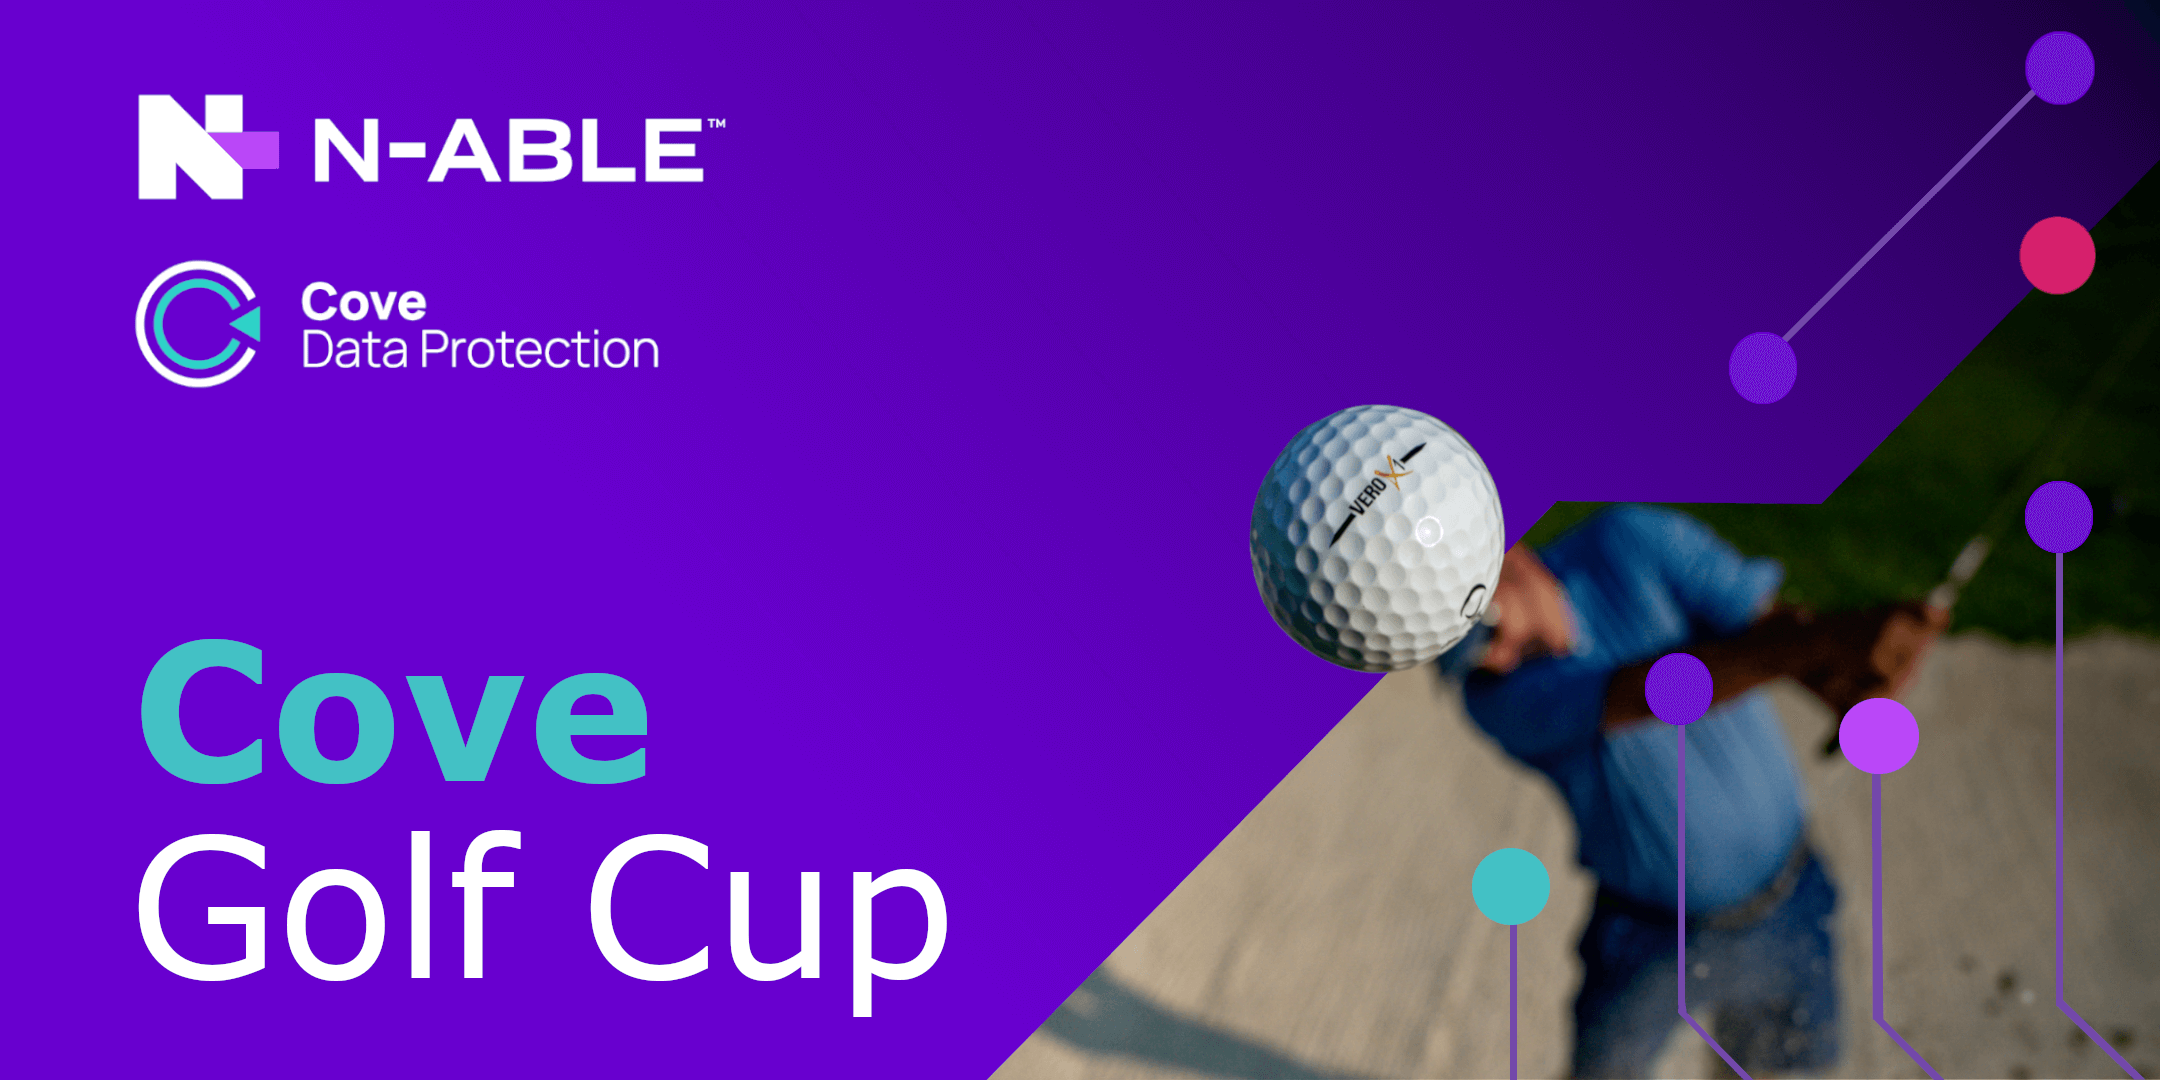 N-able Cove Golf Cup Inv